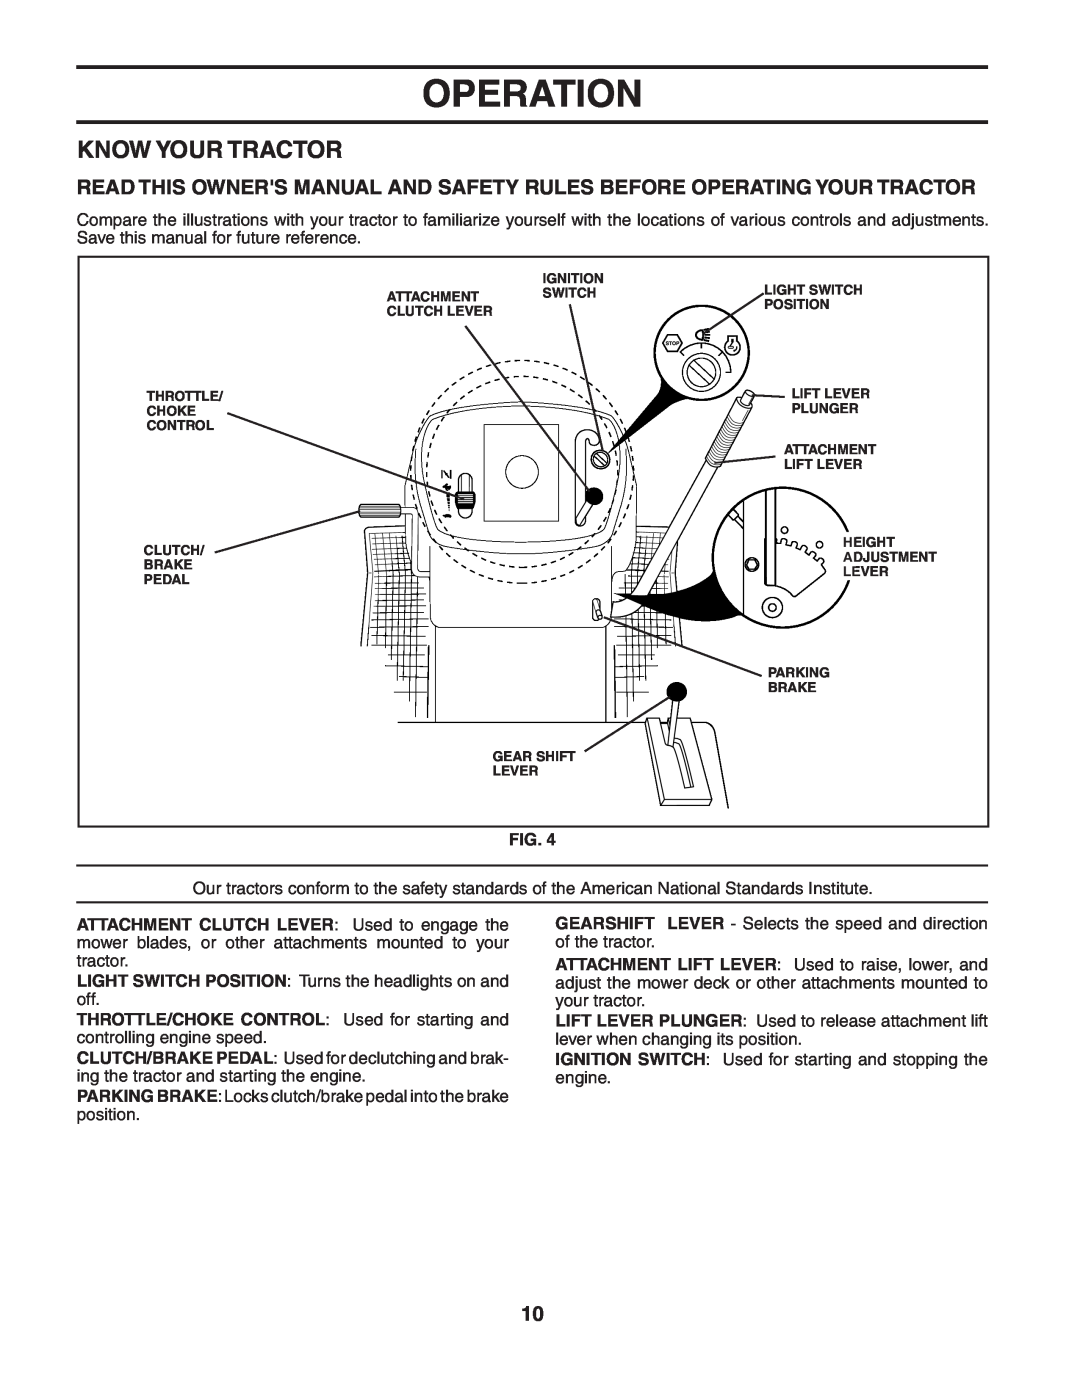 Poulan PO1742STC manual Know Your Tractor, Operation 